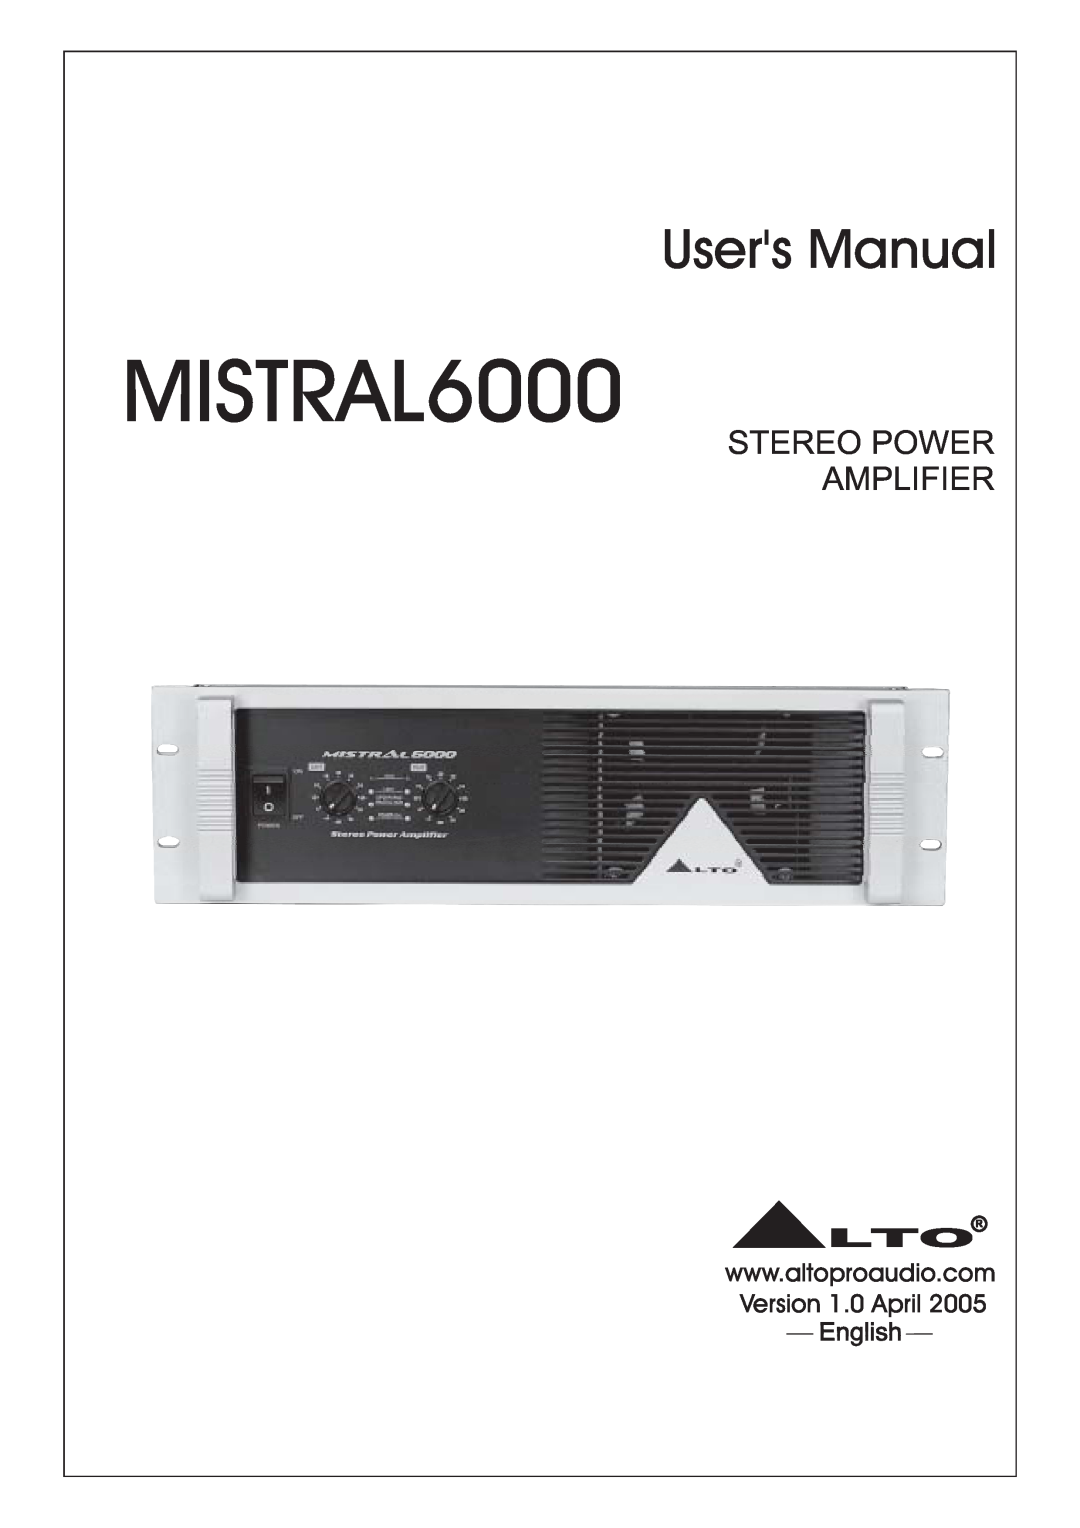 Mistral user manual MISTRAL6000, Stereo Power Amplifier, Version 1.0 April, English 